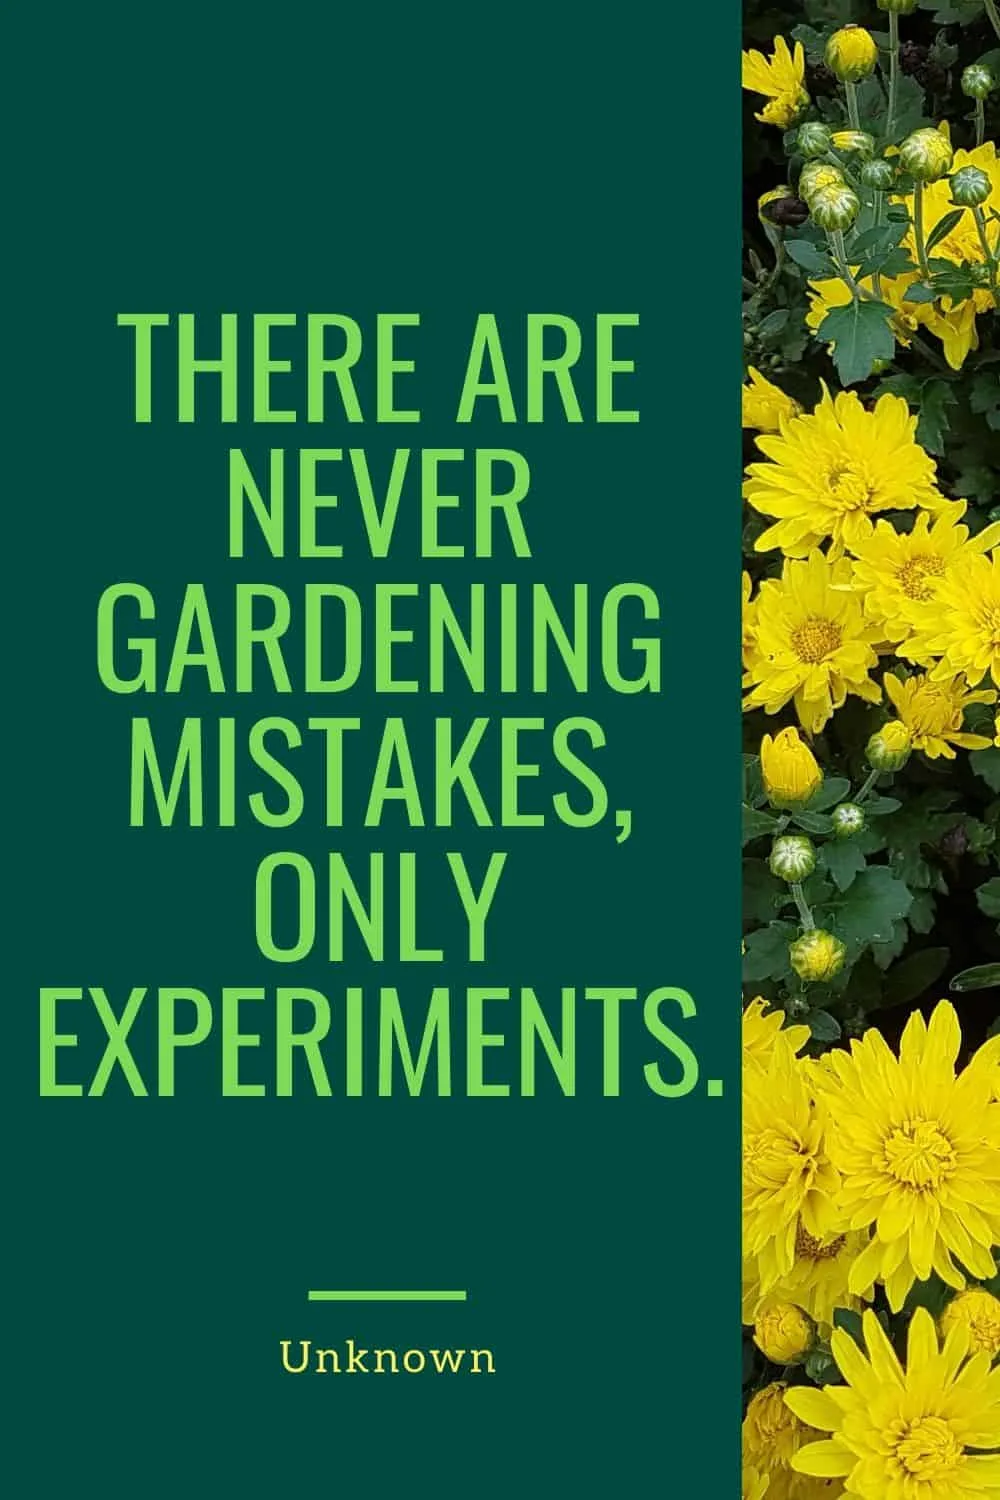 There are never gardening mistakes, only experiments.